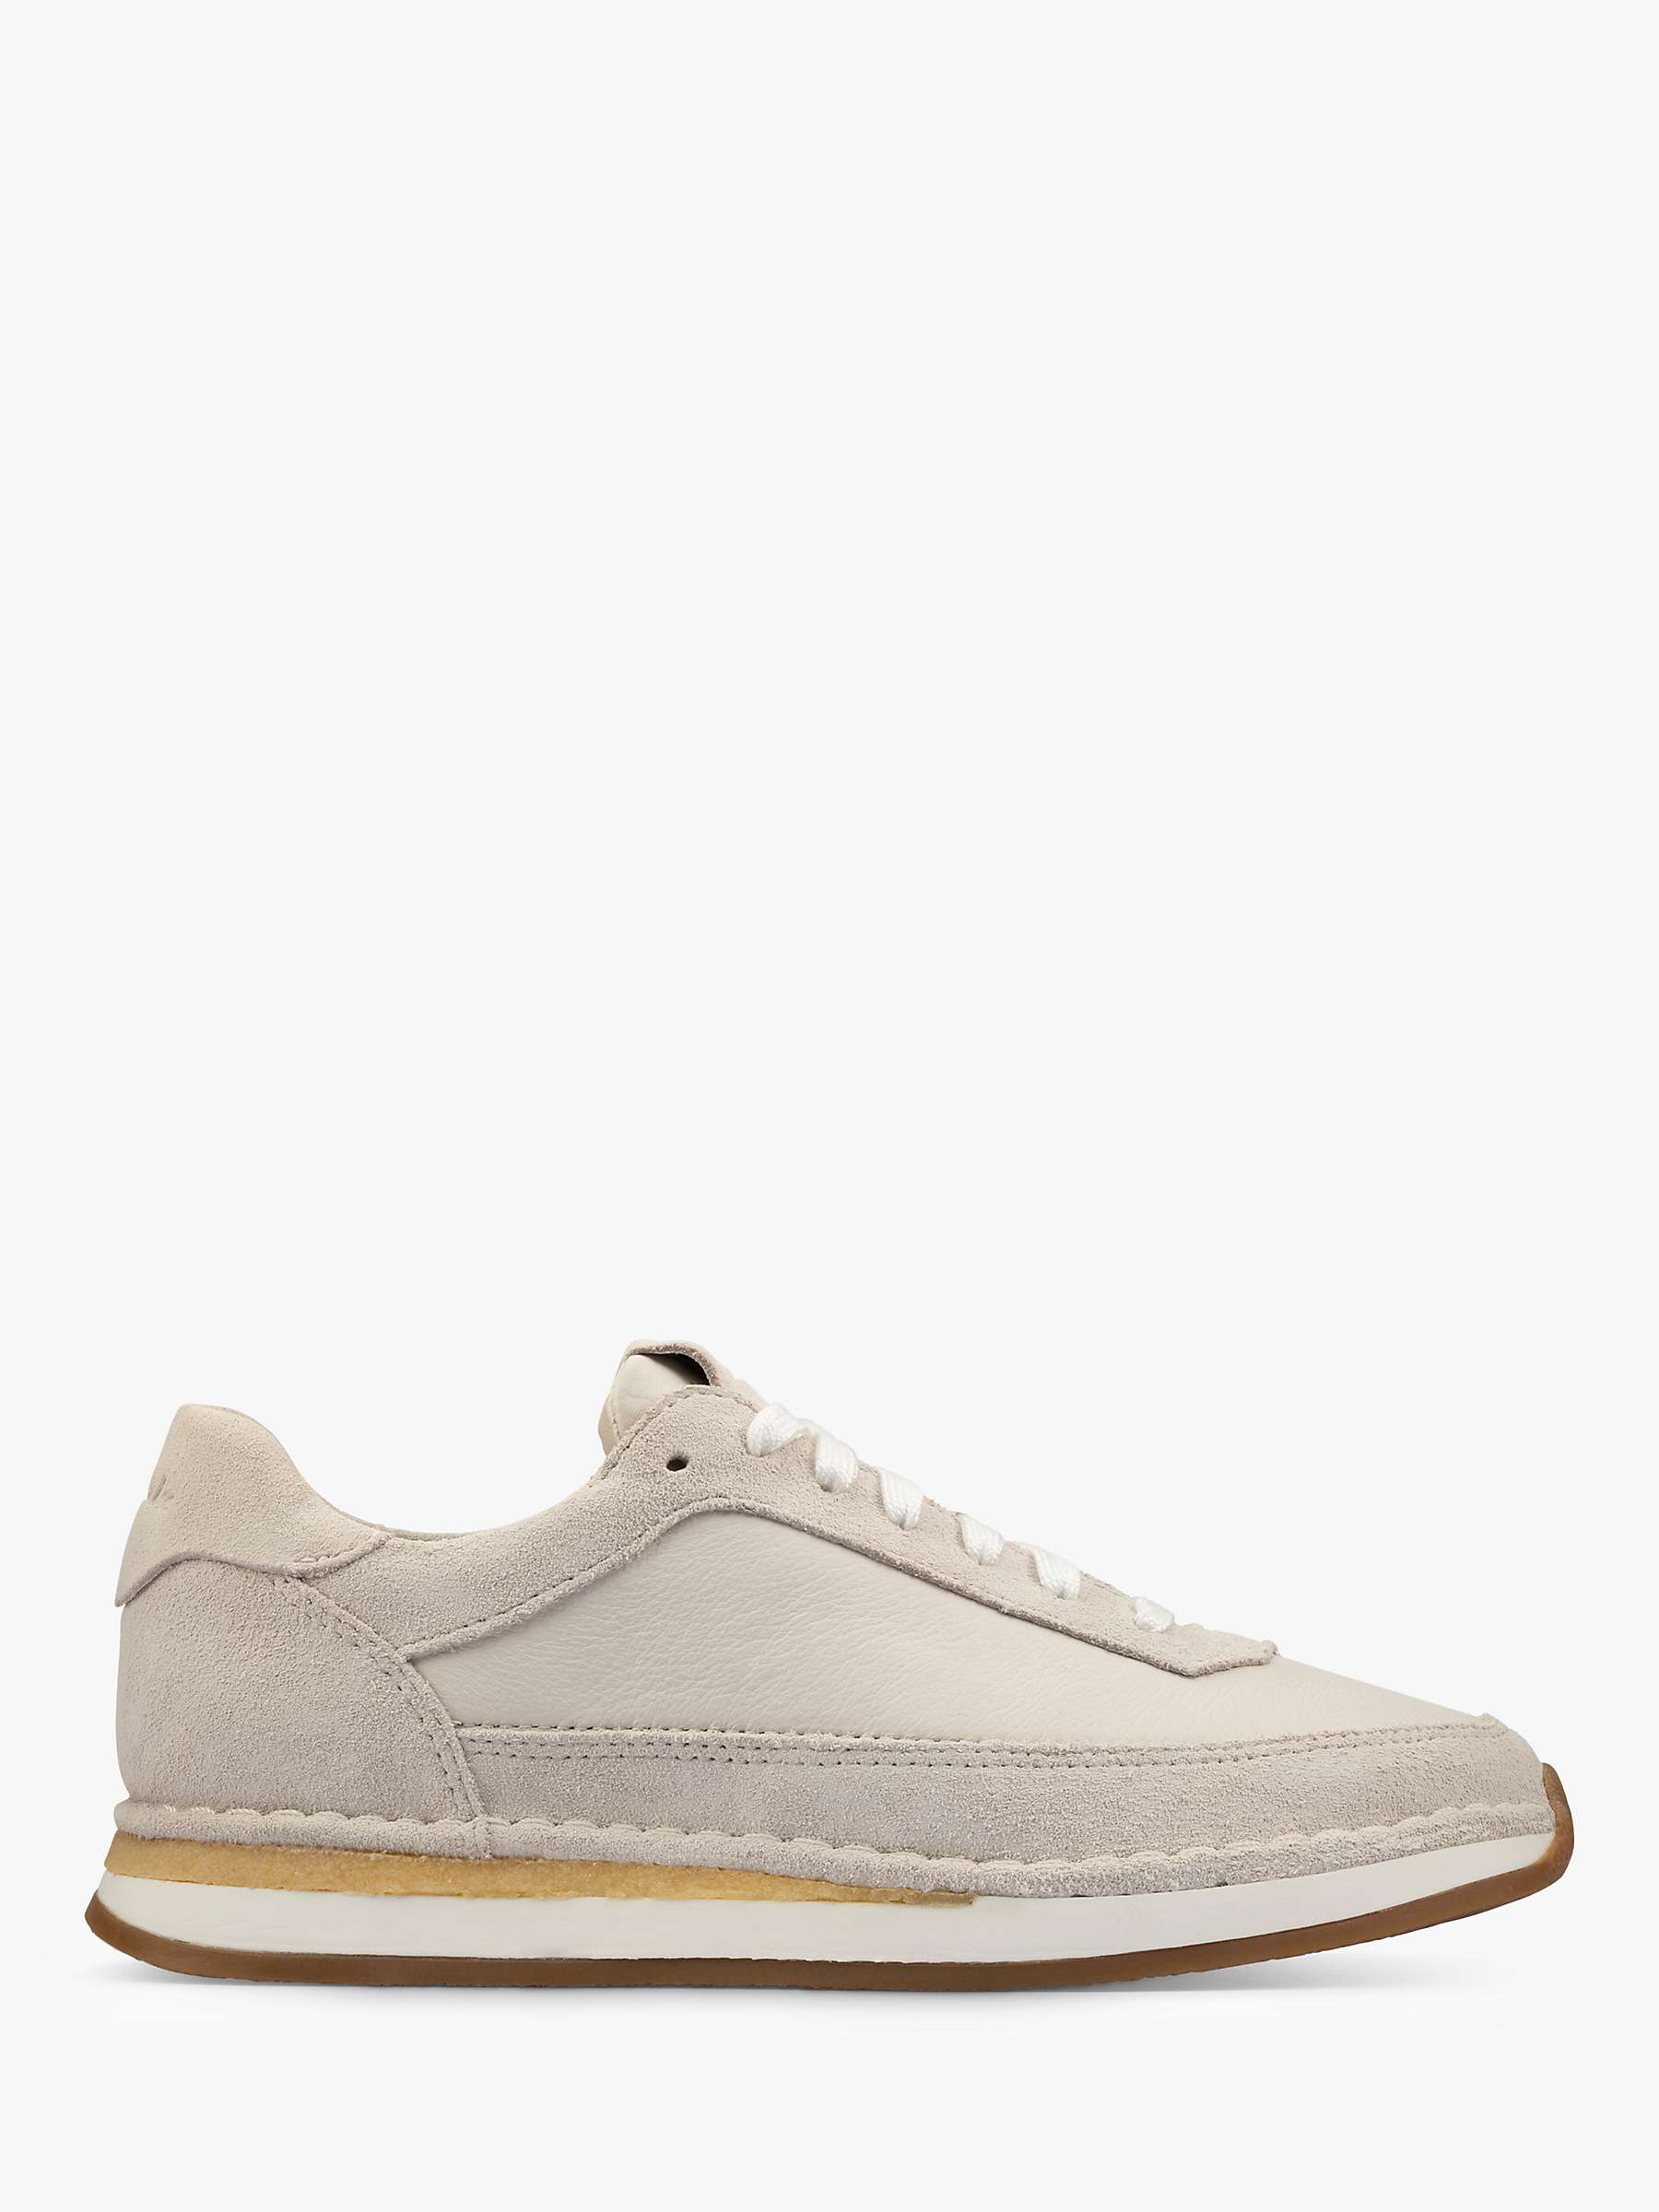 Buy Clarks CraftRun Suede Trainers Online at johnlewis.com